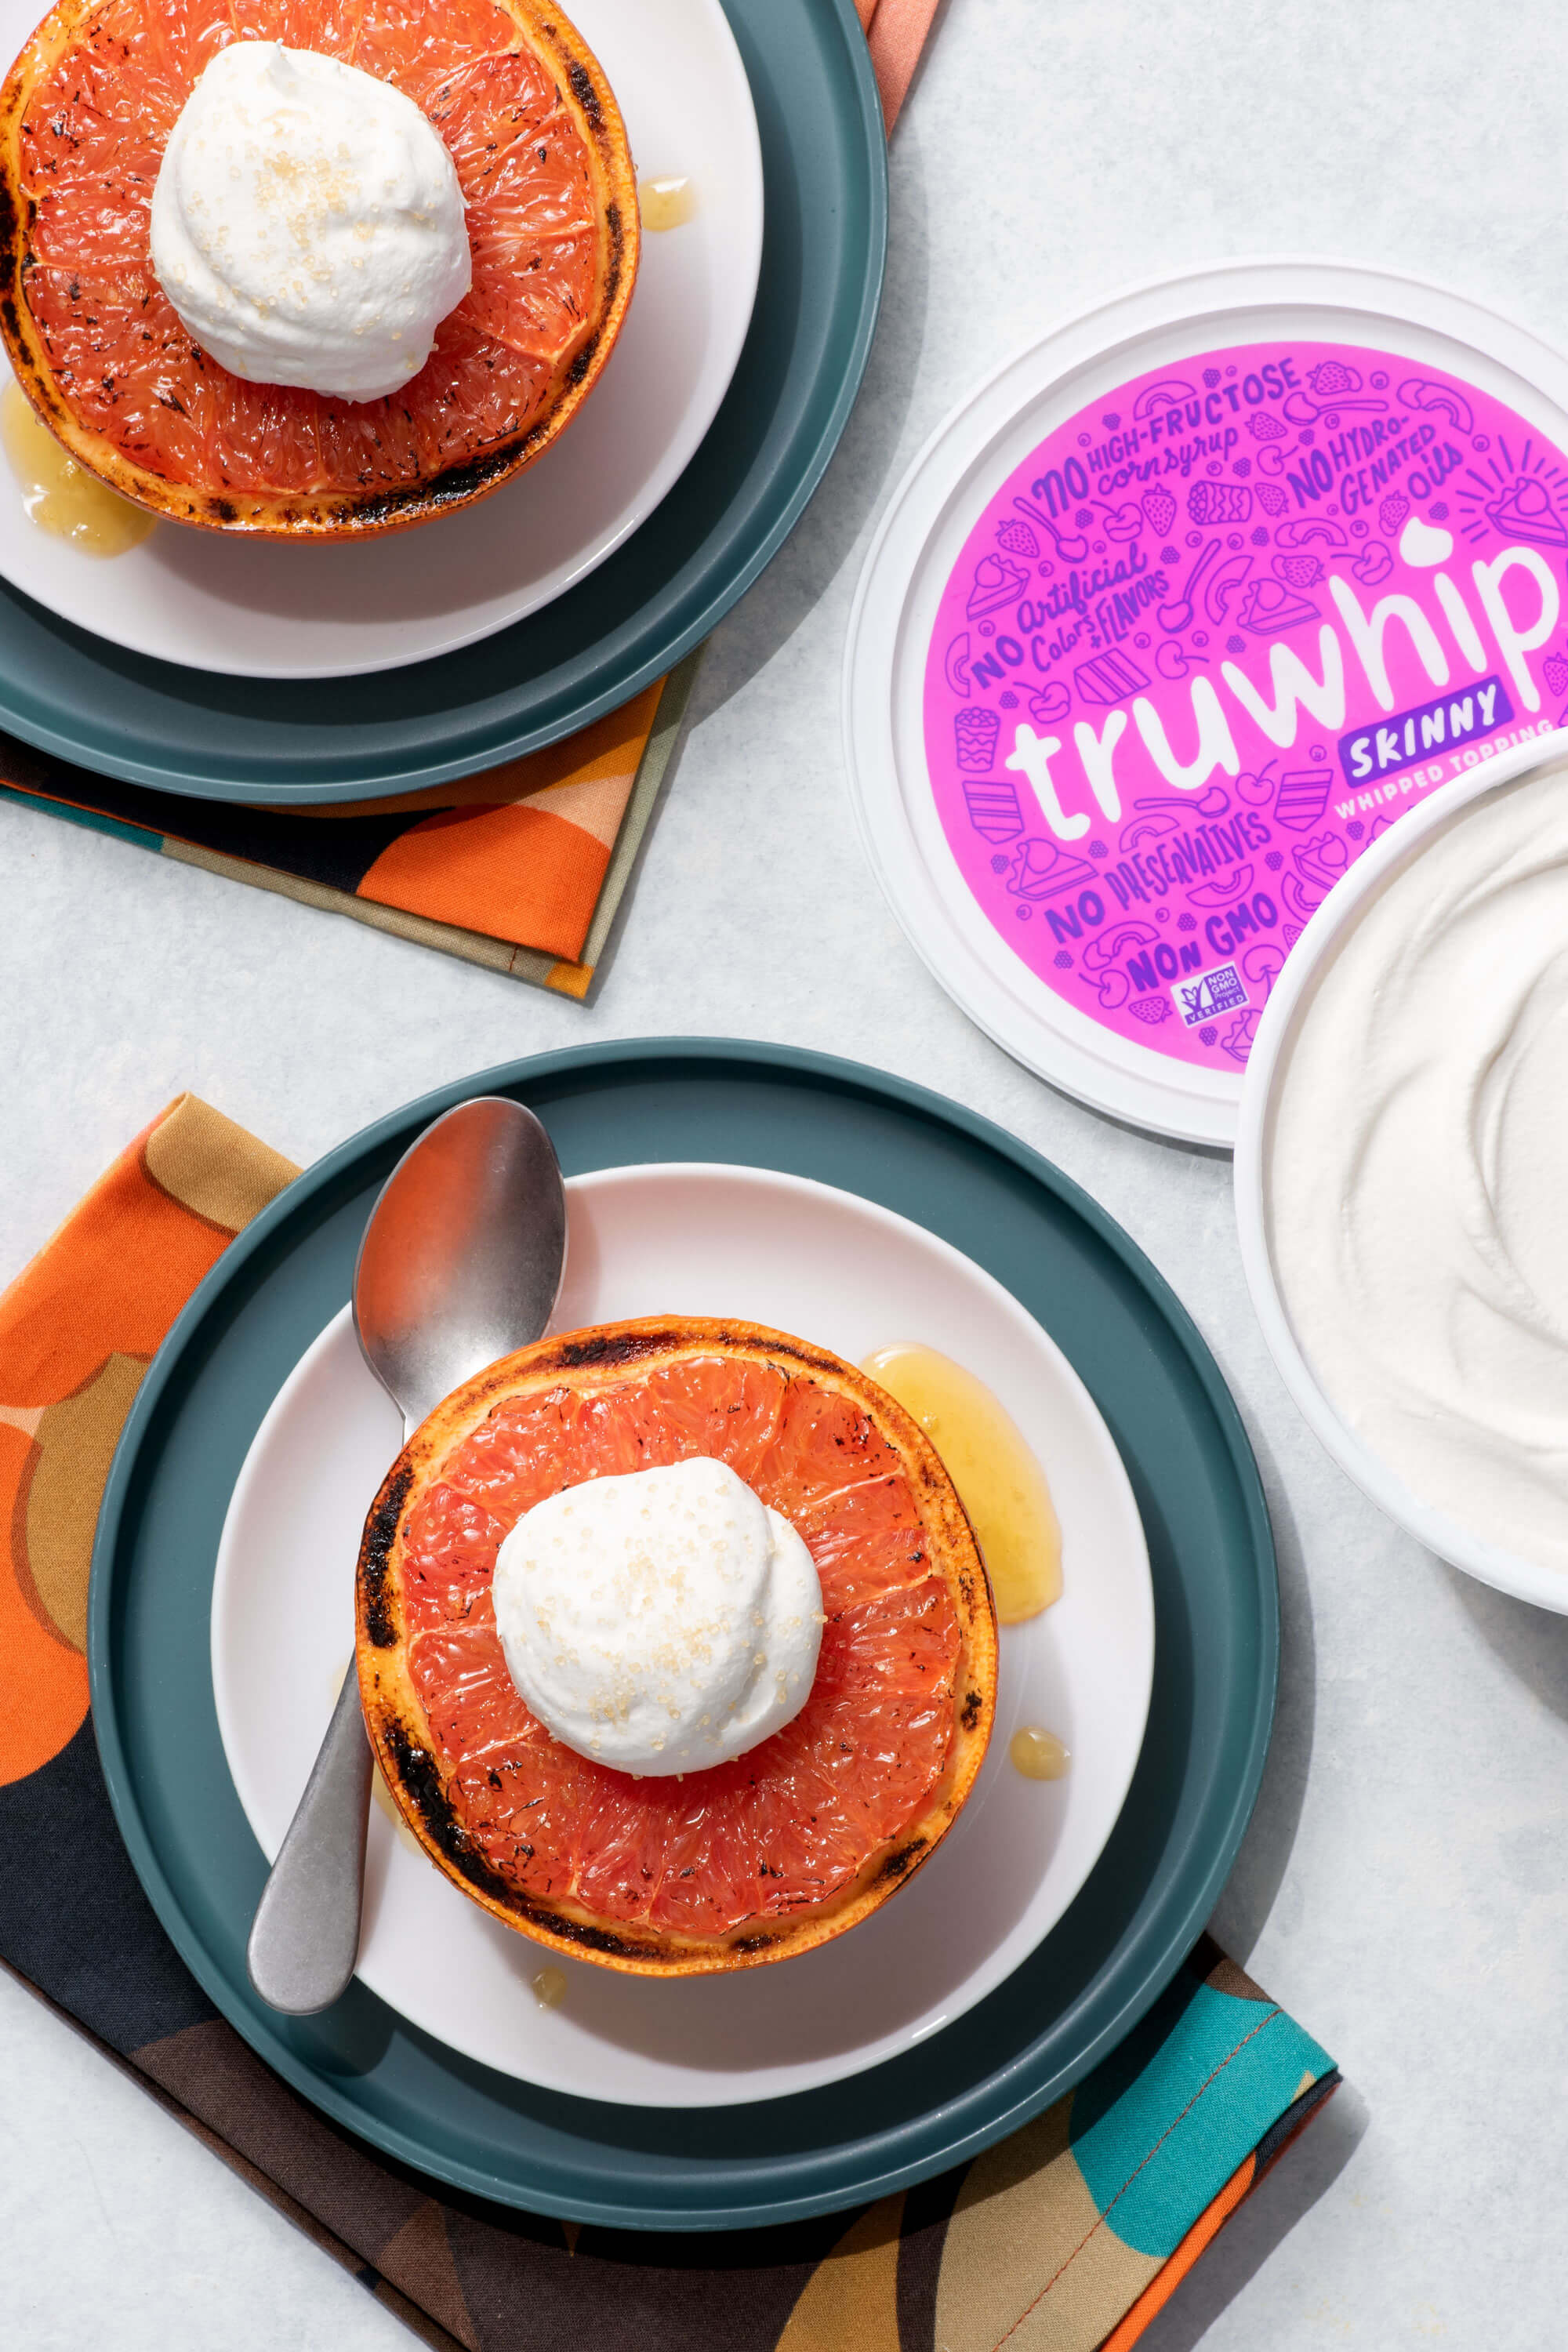 truwhip topped broiled grapefruit